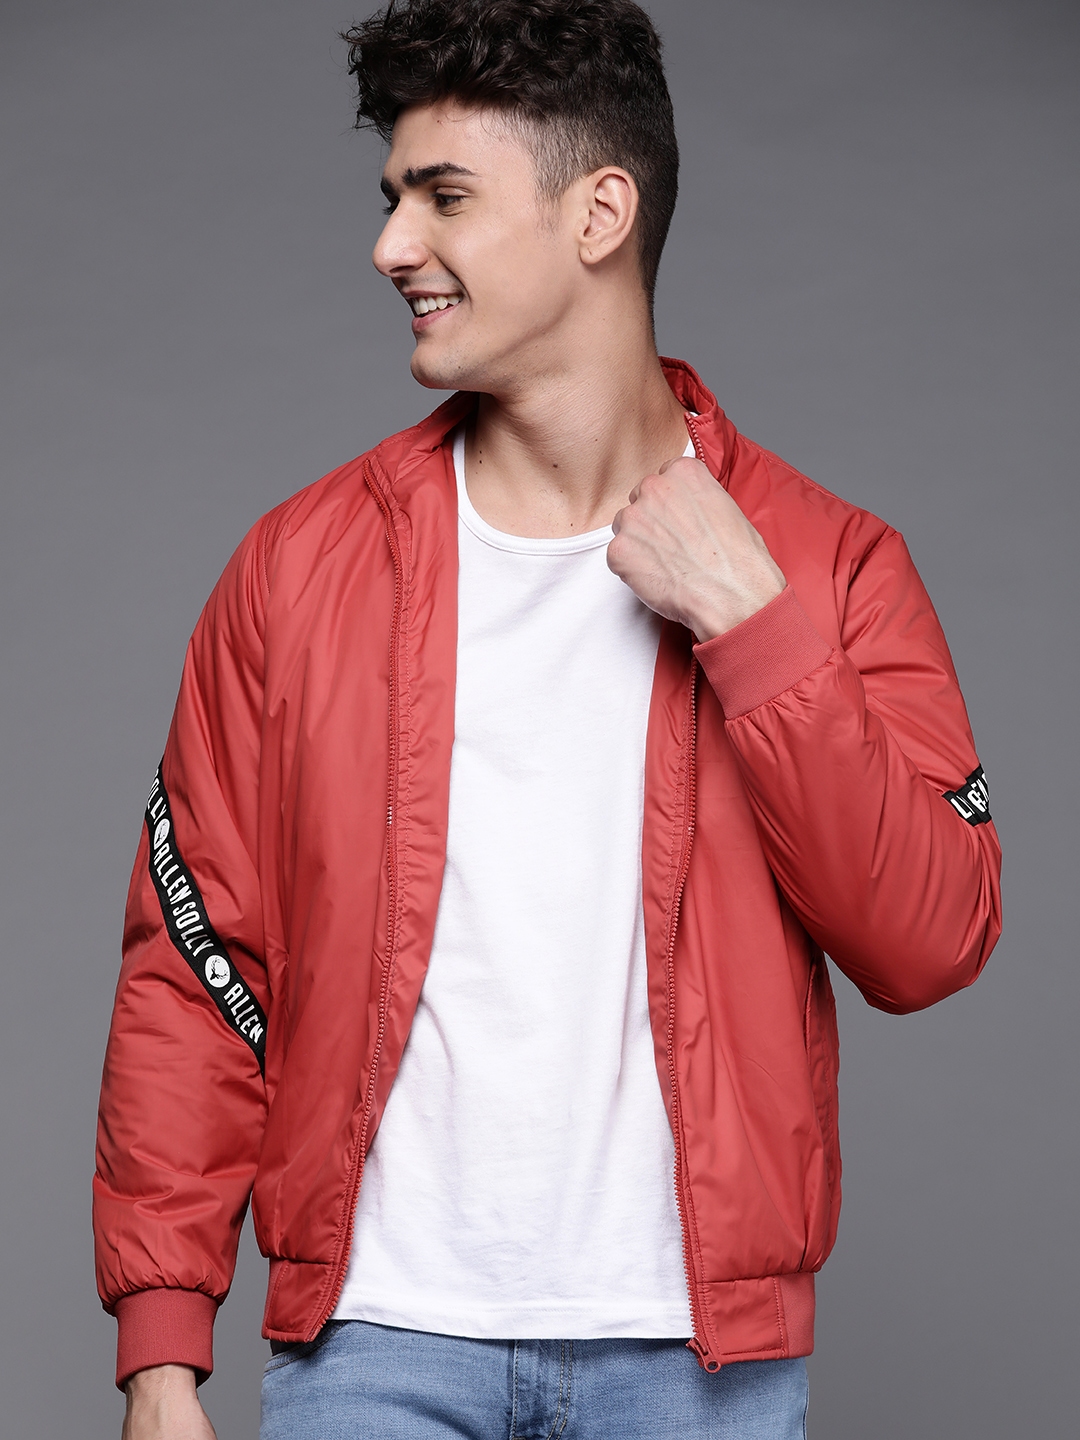 Buy Allen Solly Men Red Solid Bomber jacket Online at Low Prices